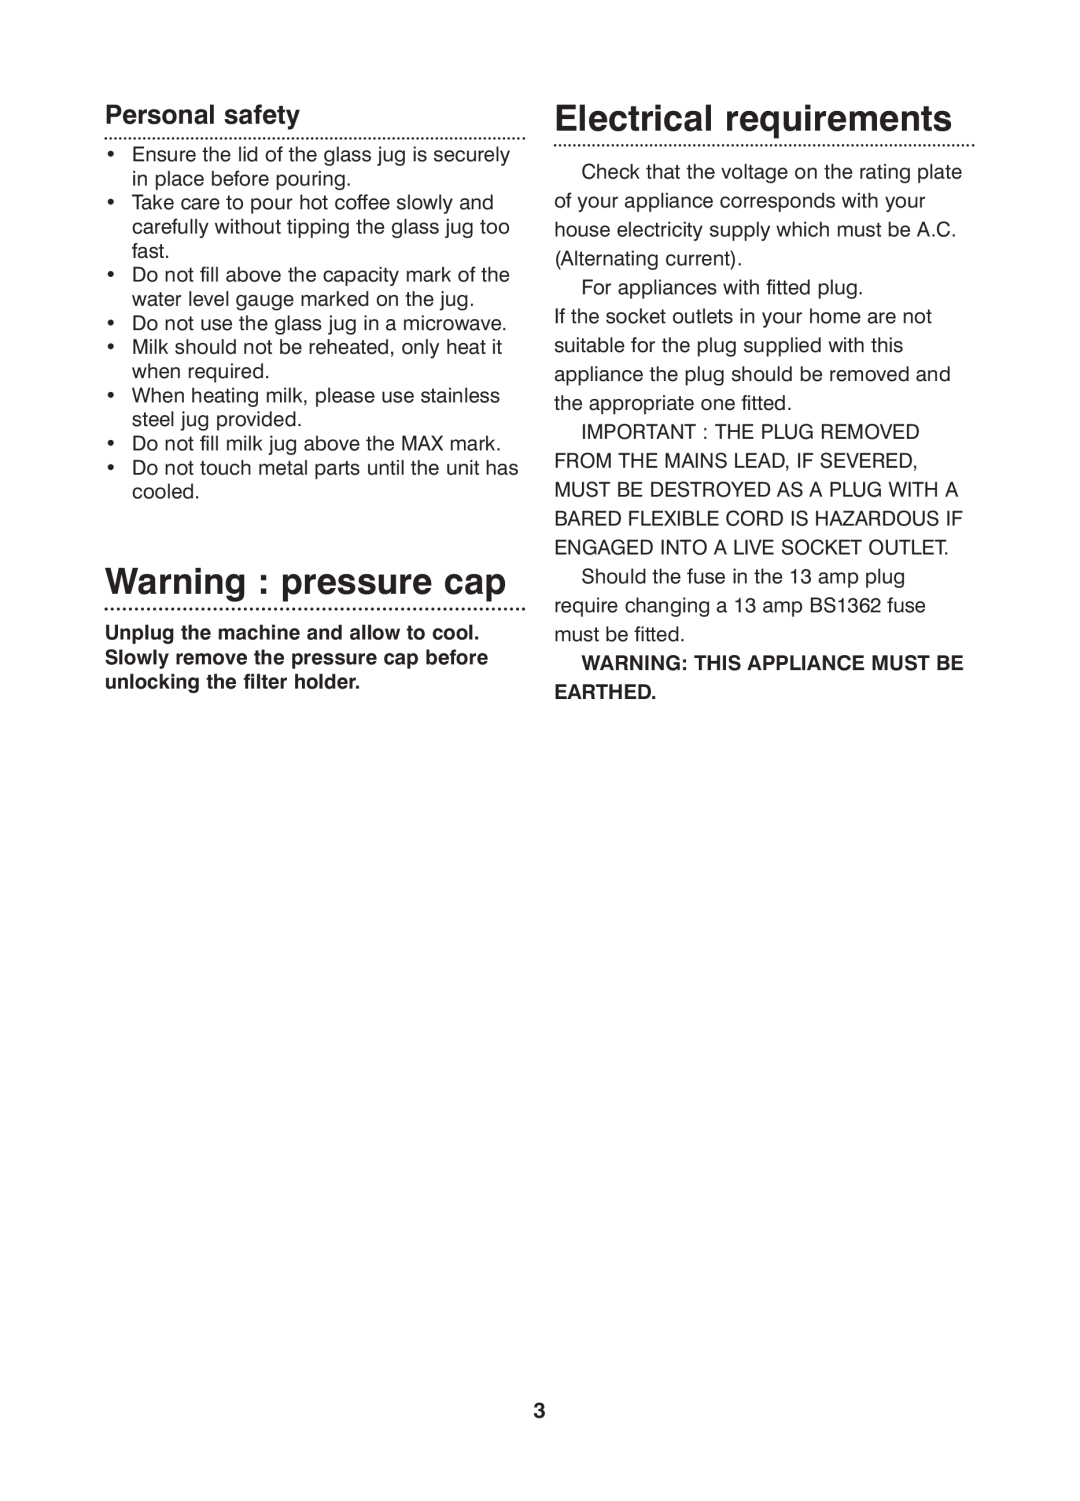 Morphy Richards Cafe Rico Espresso coffee maker manual Warning pressure cap, Electrical requirements, Personal safety 